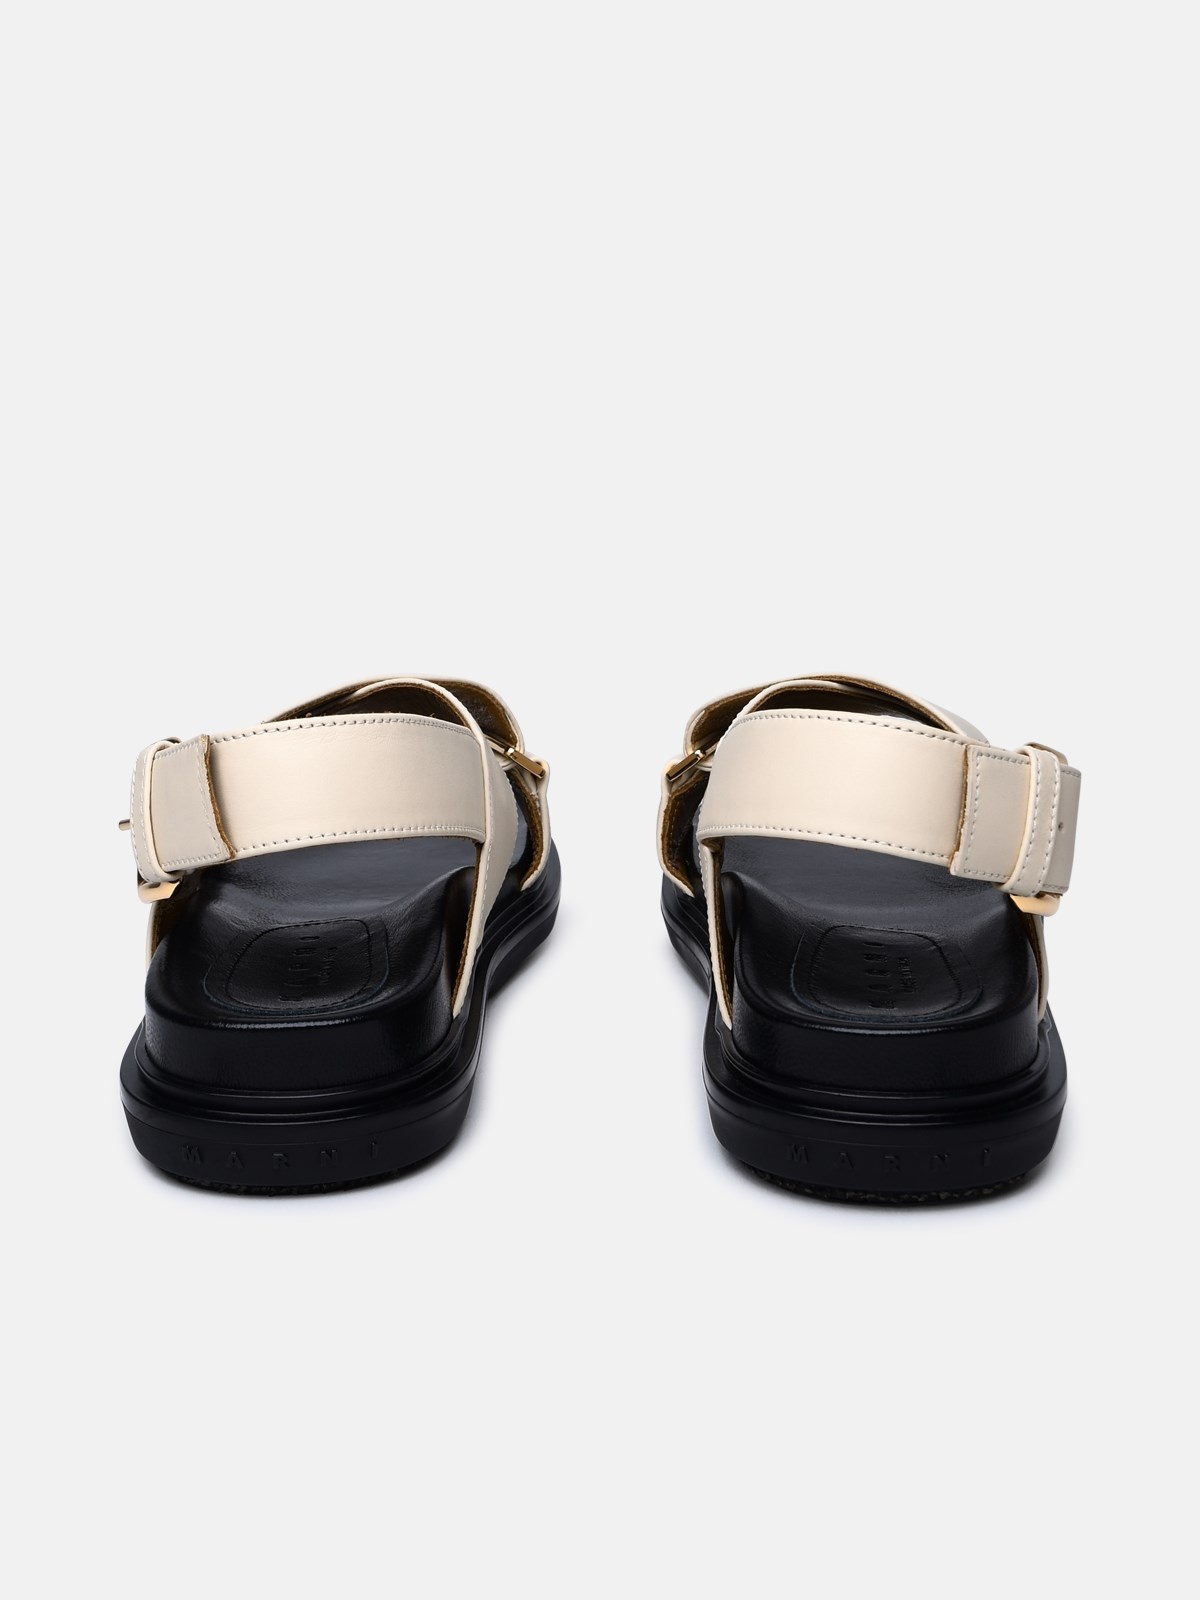 IVORY LEATHER SANDALS - 4